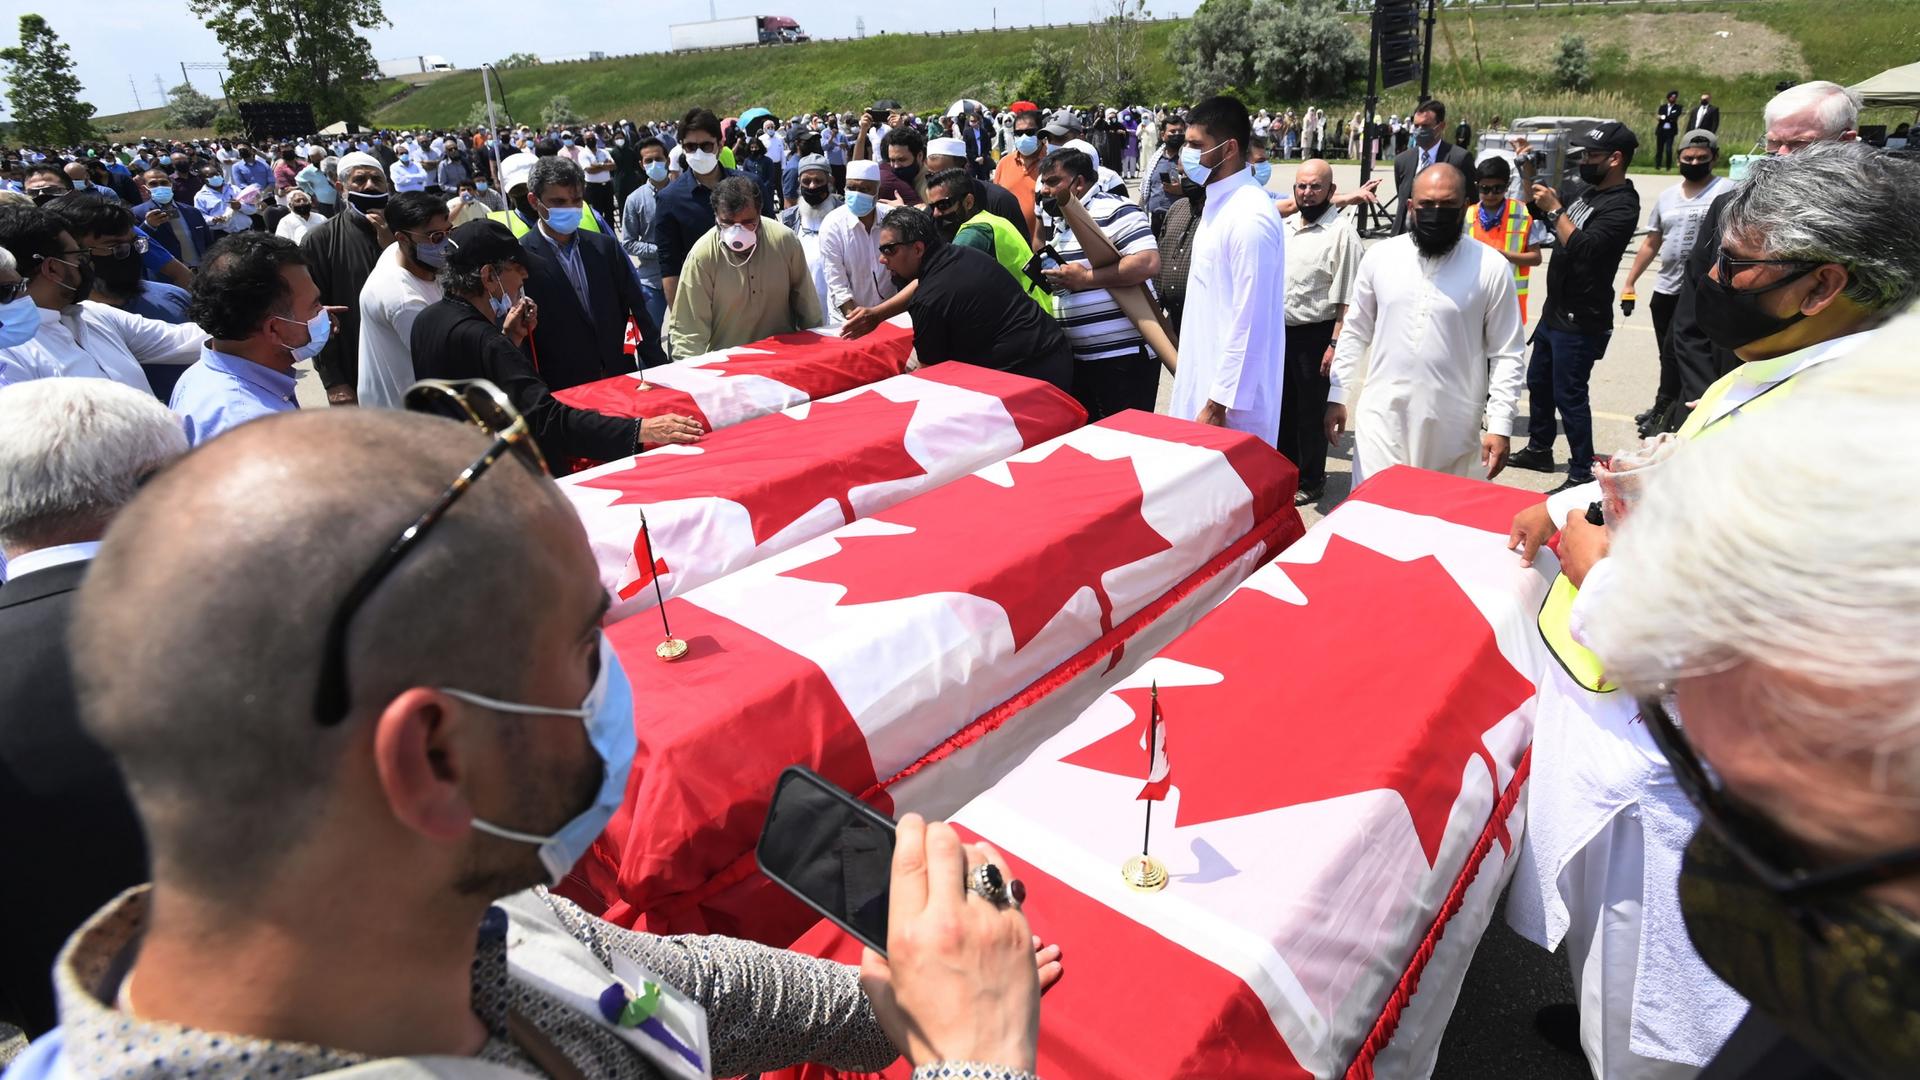 Four caskets are covered with the Canadian flag of red and white as mourners look on. 